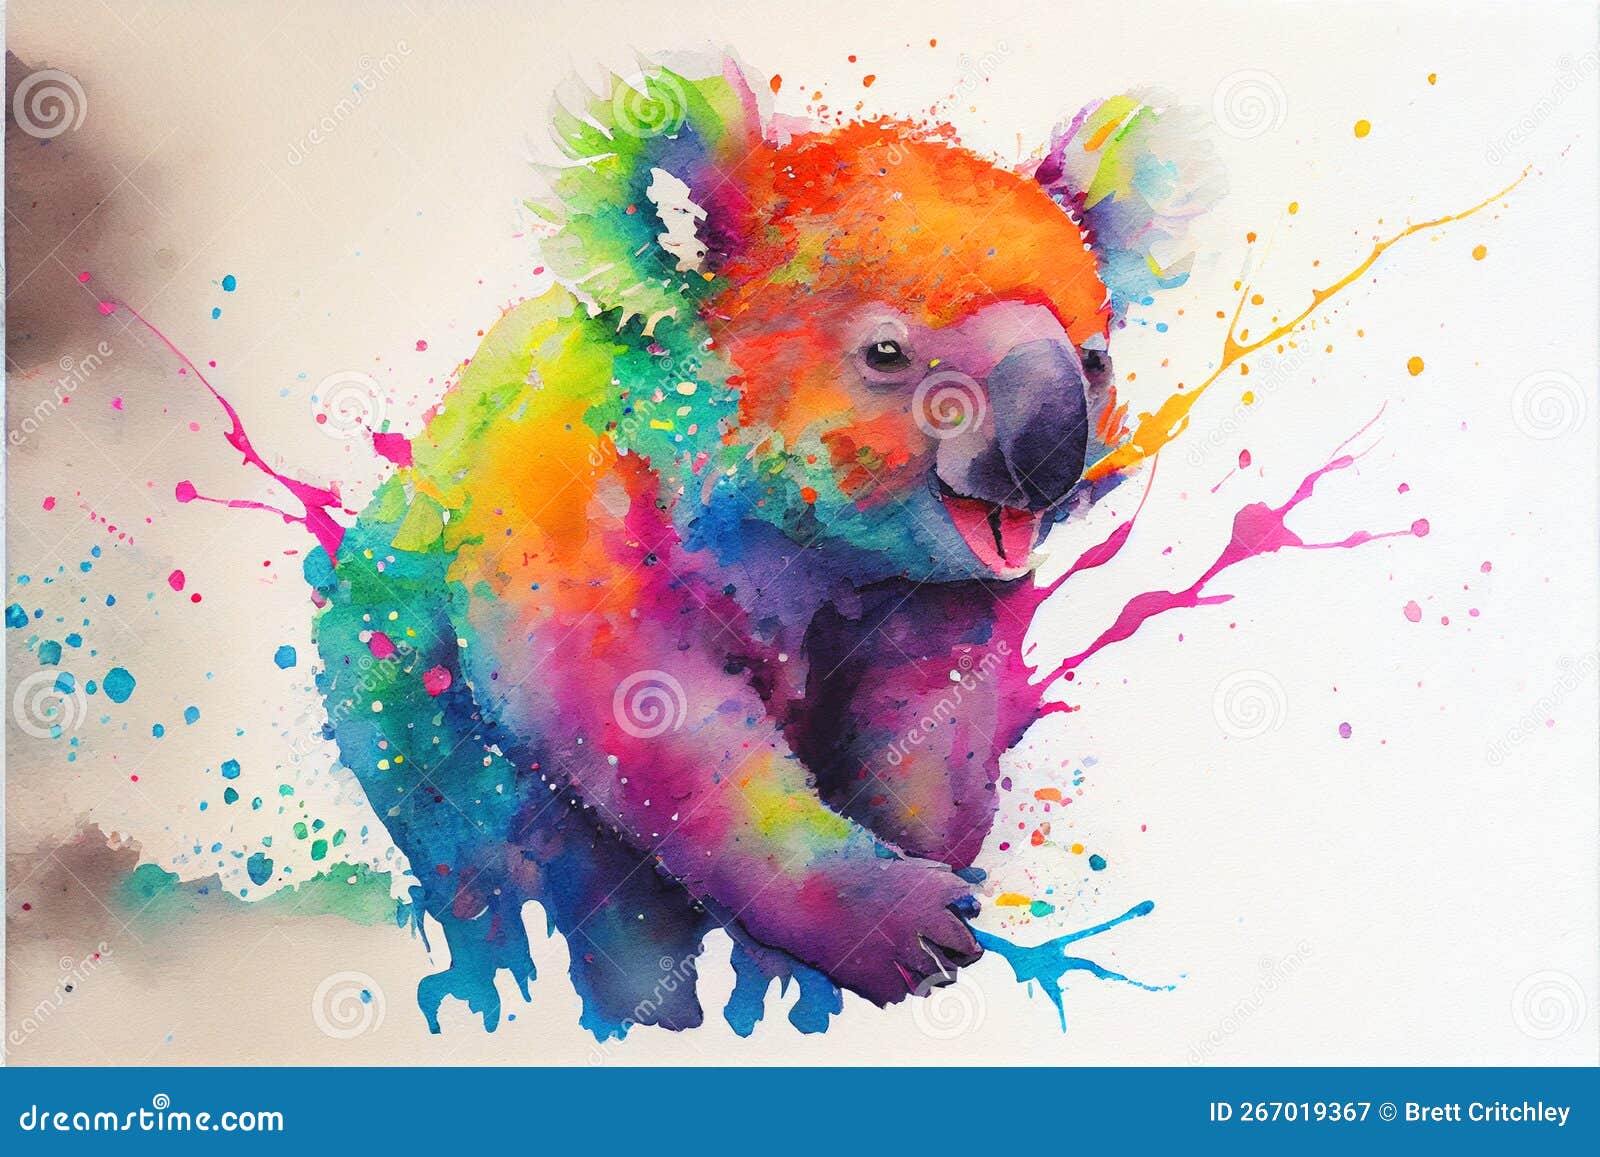 https://thumbs.dreamstime.com/z/colorful-rainbow-abstract-koala-bear-watercolor-painting-multicolored-textured-white-paper-colourful-watercolour-267019367.jpg